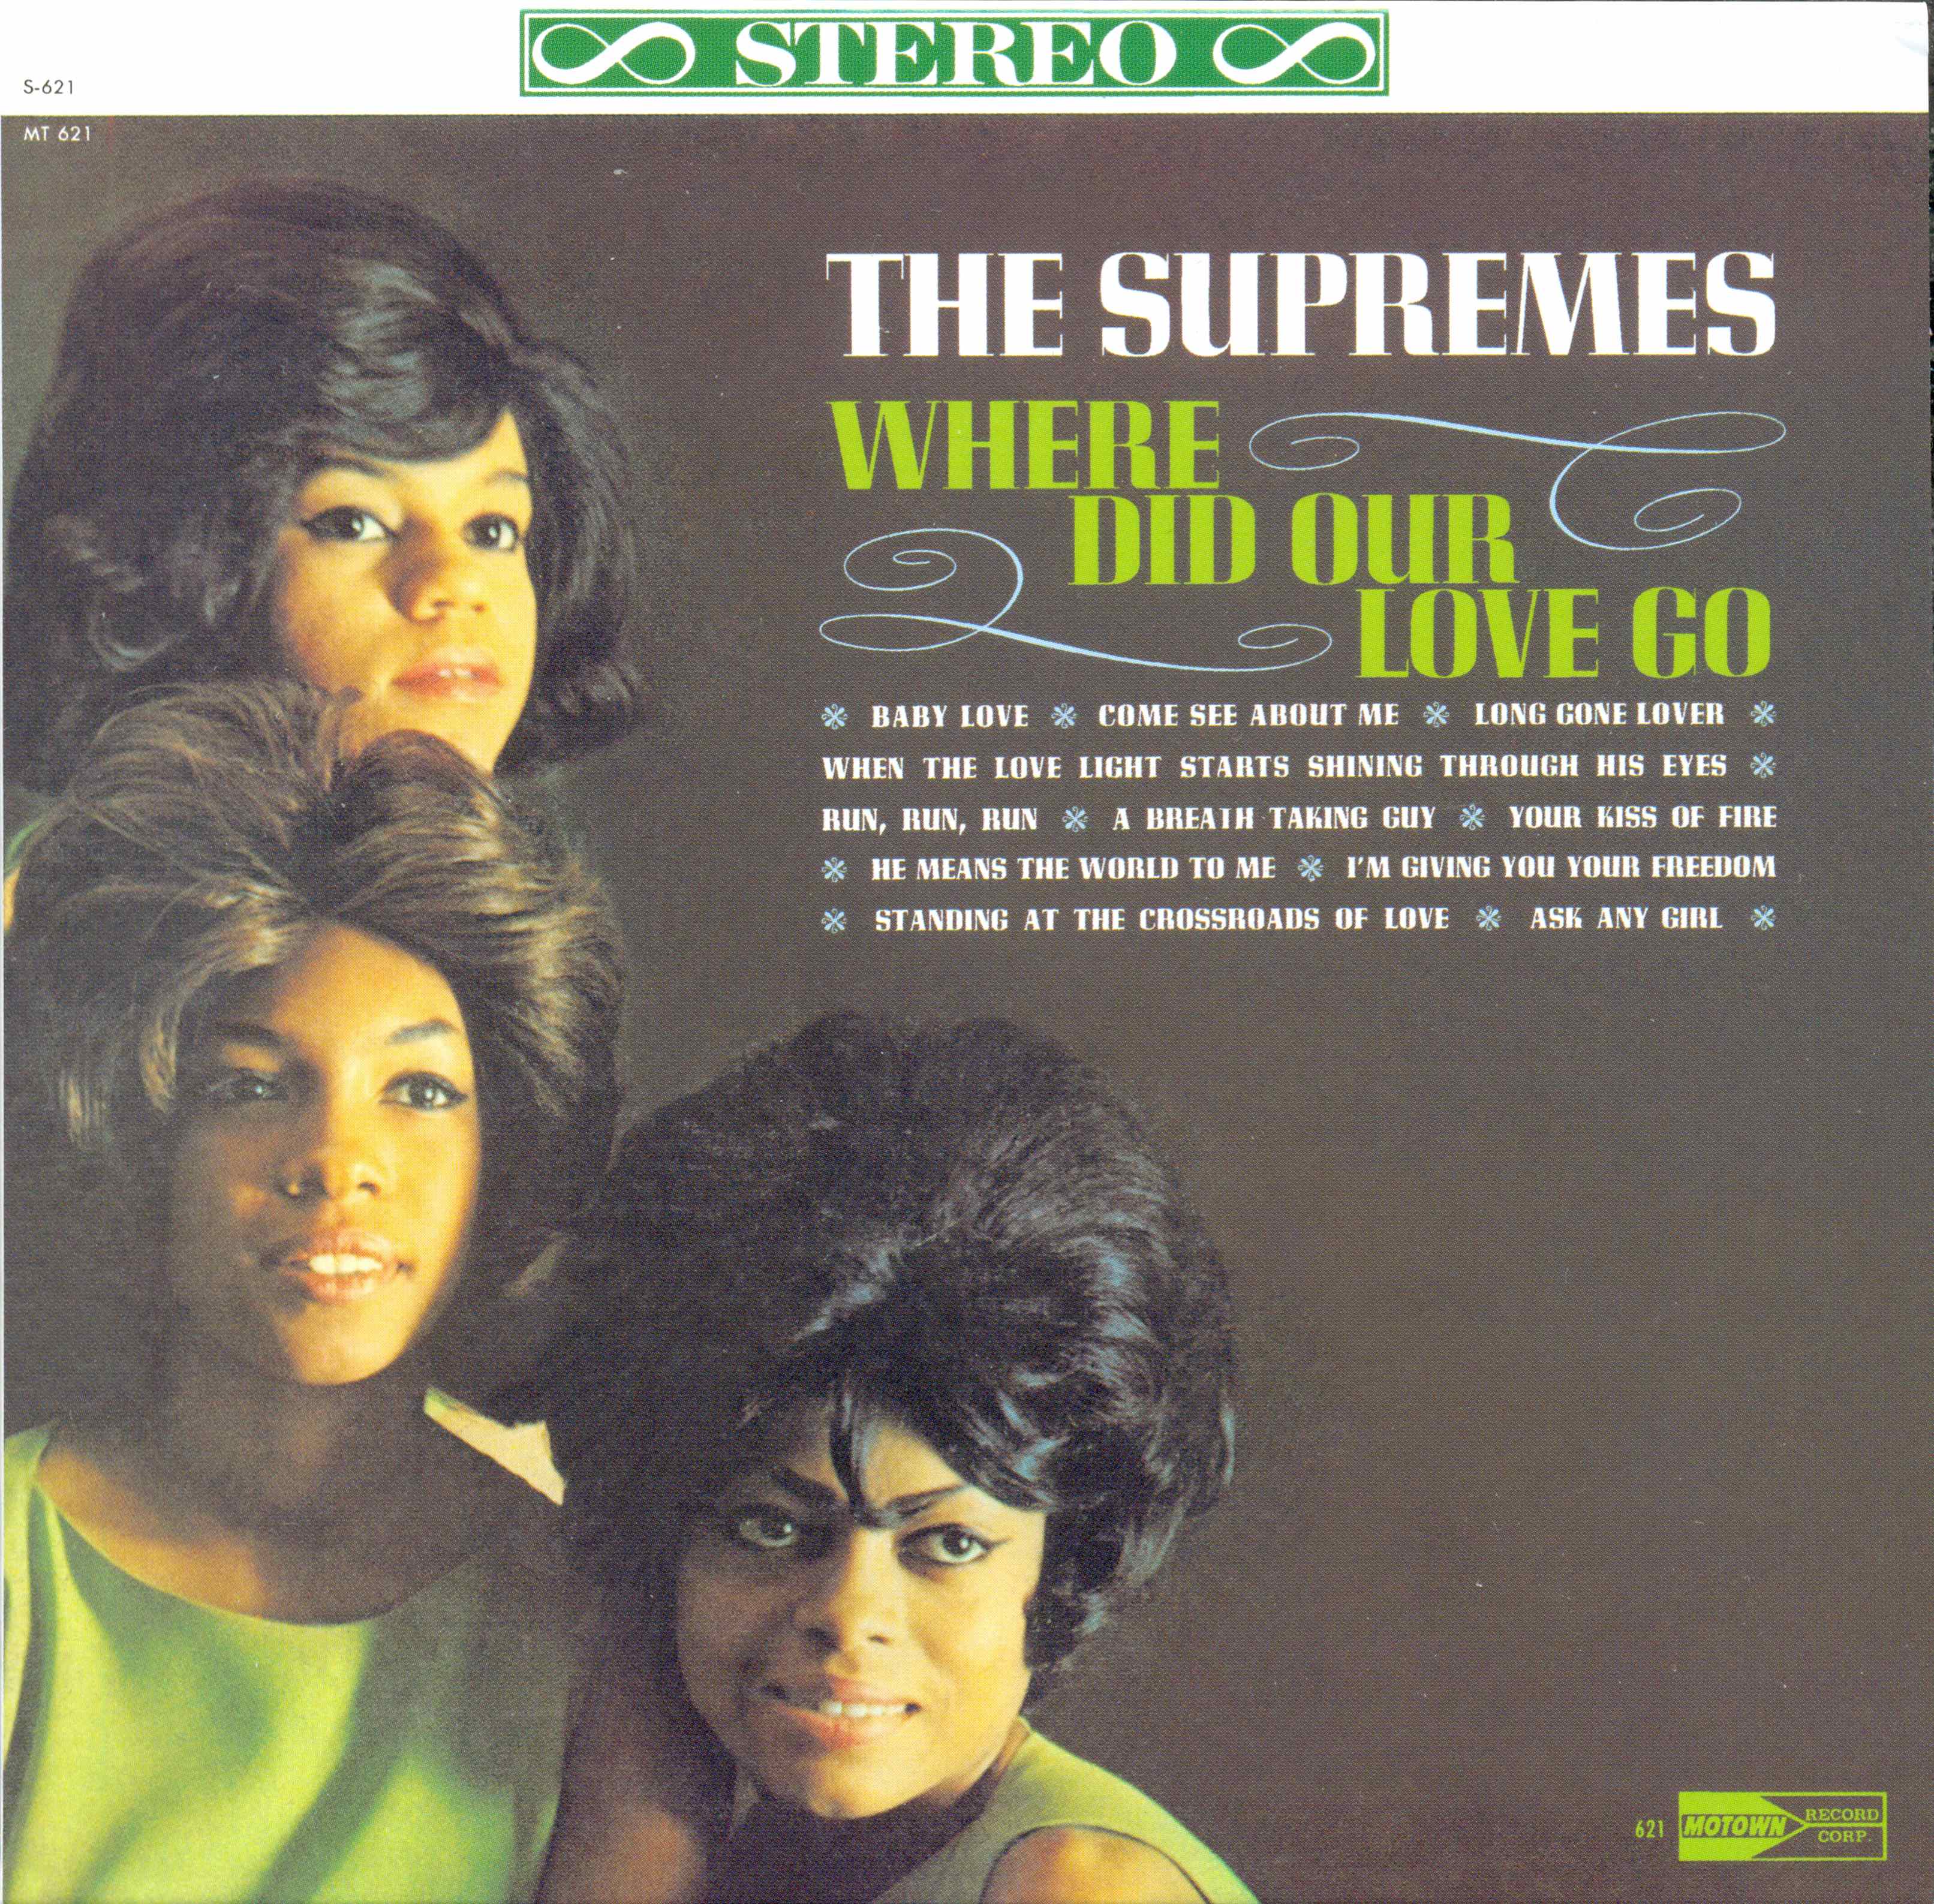 1964 - The Supremes - Where Did Our Love Go